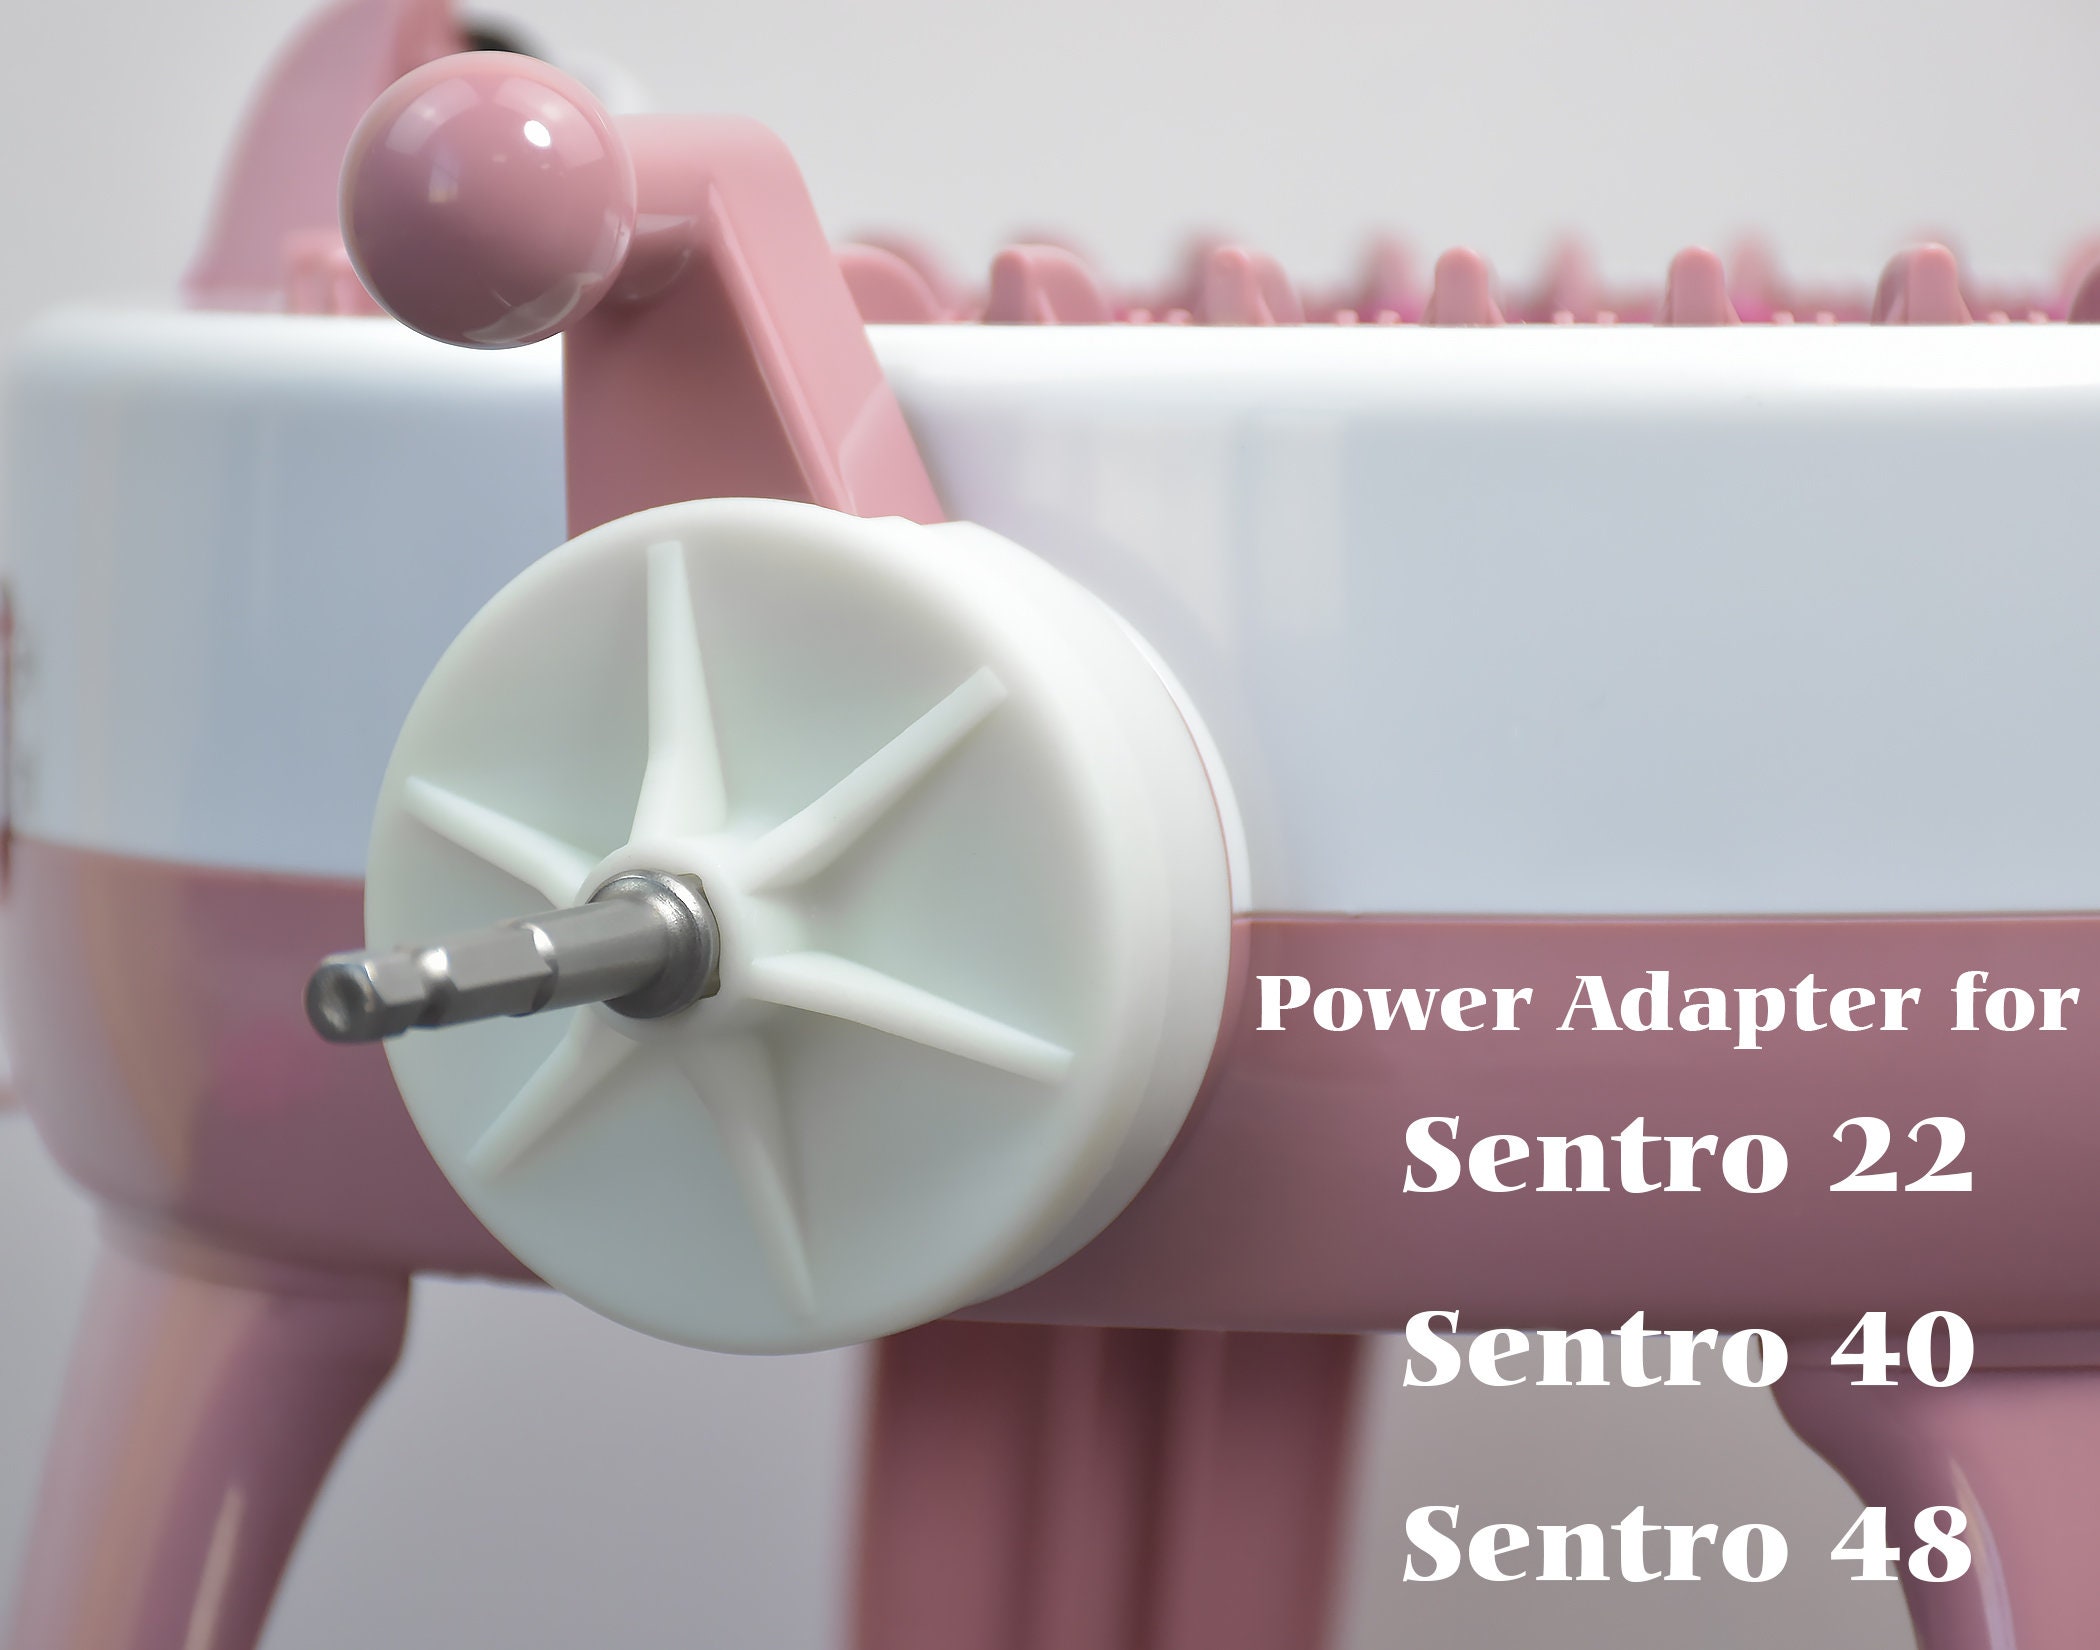 Power Adapter Compatible with Sentro Knitting Machine,Crank Handle Adapter  for Knitting,Adapter with Hex Steel Bit Compatible with Sentro 48/40/22 and